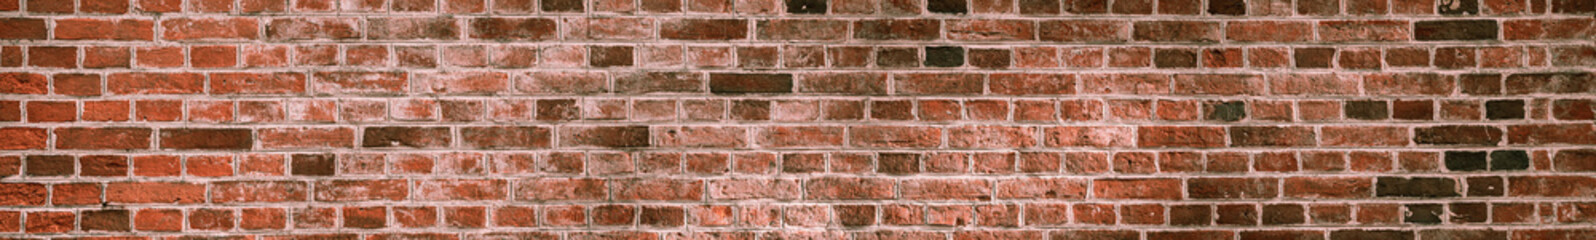 Panorama of a soiled dirty red brick wall. Old dilapidated brick wall surface.